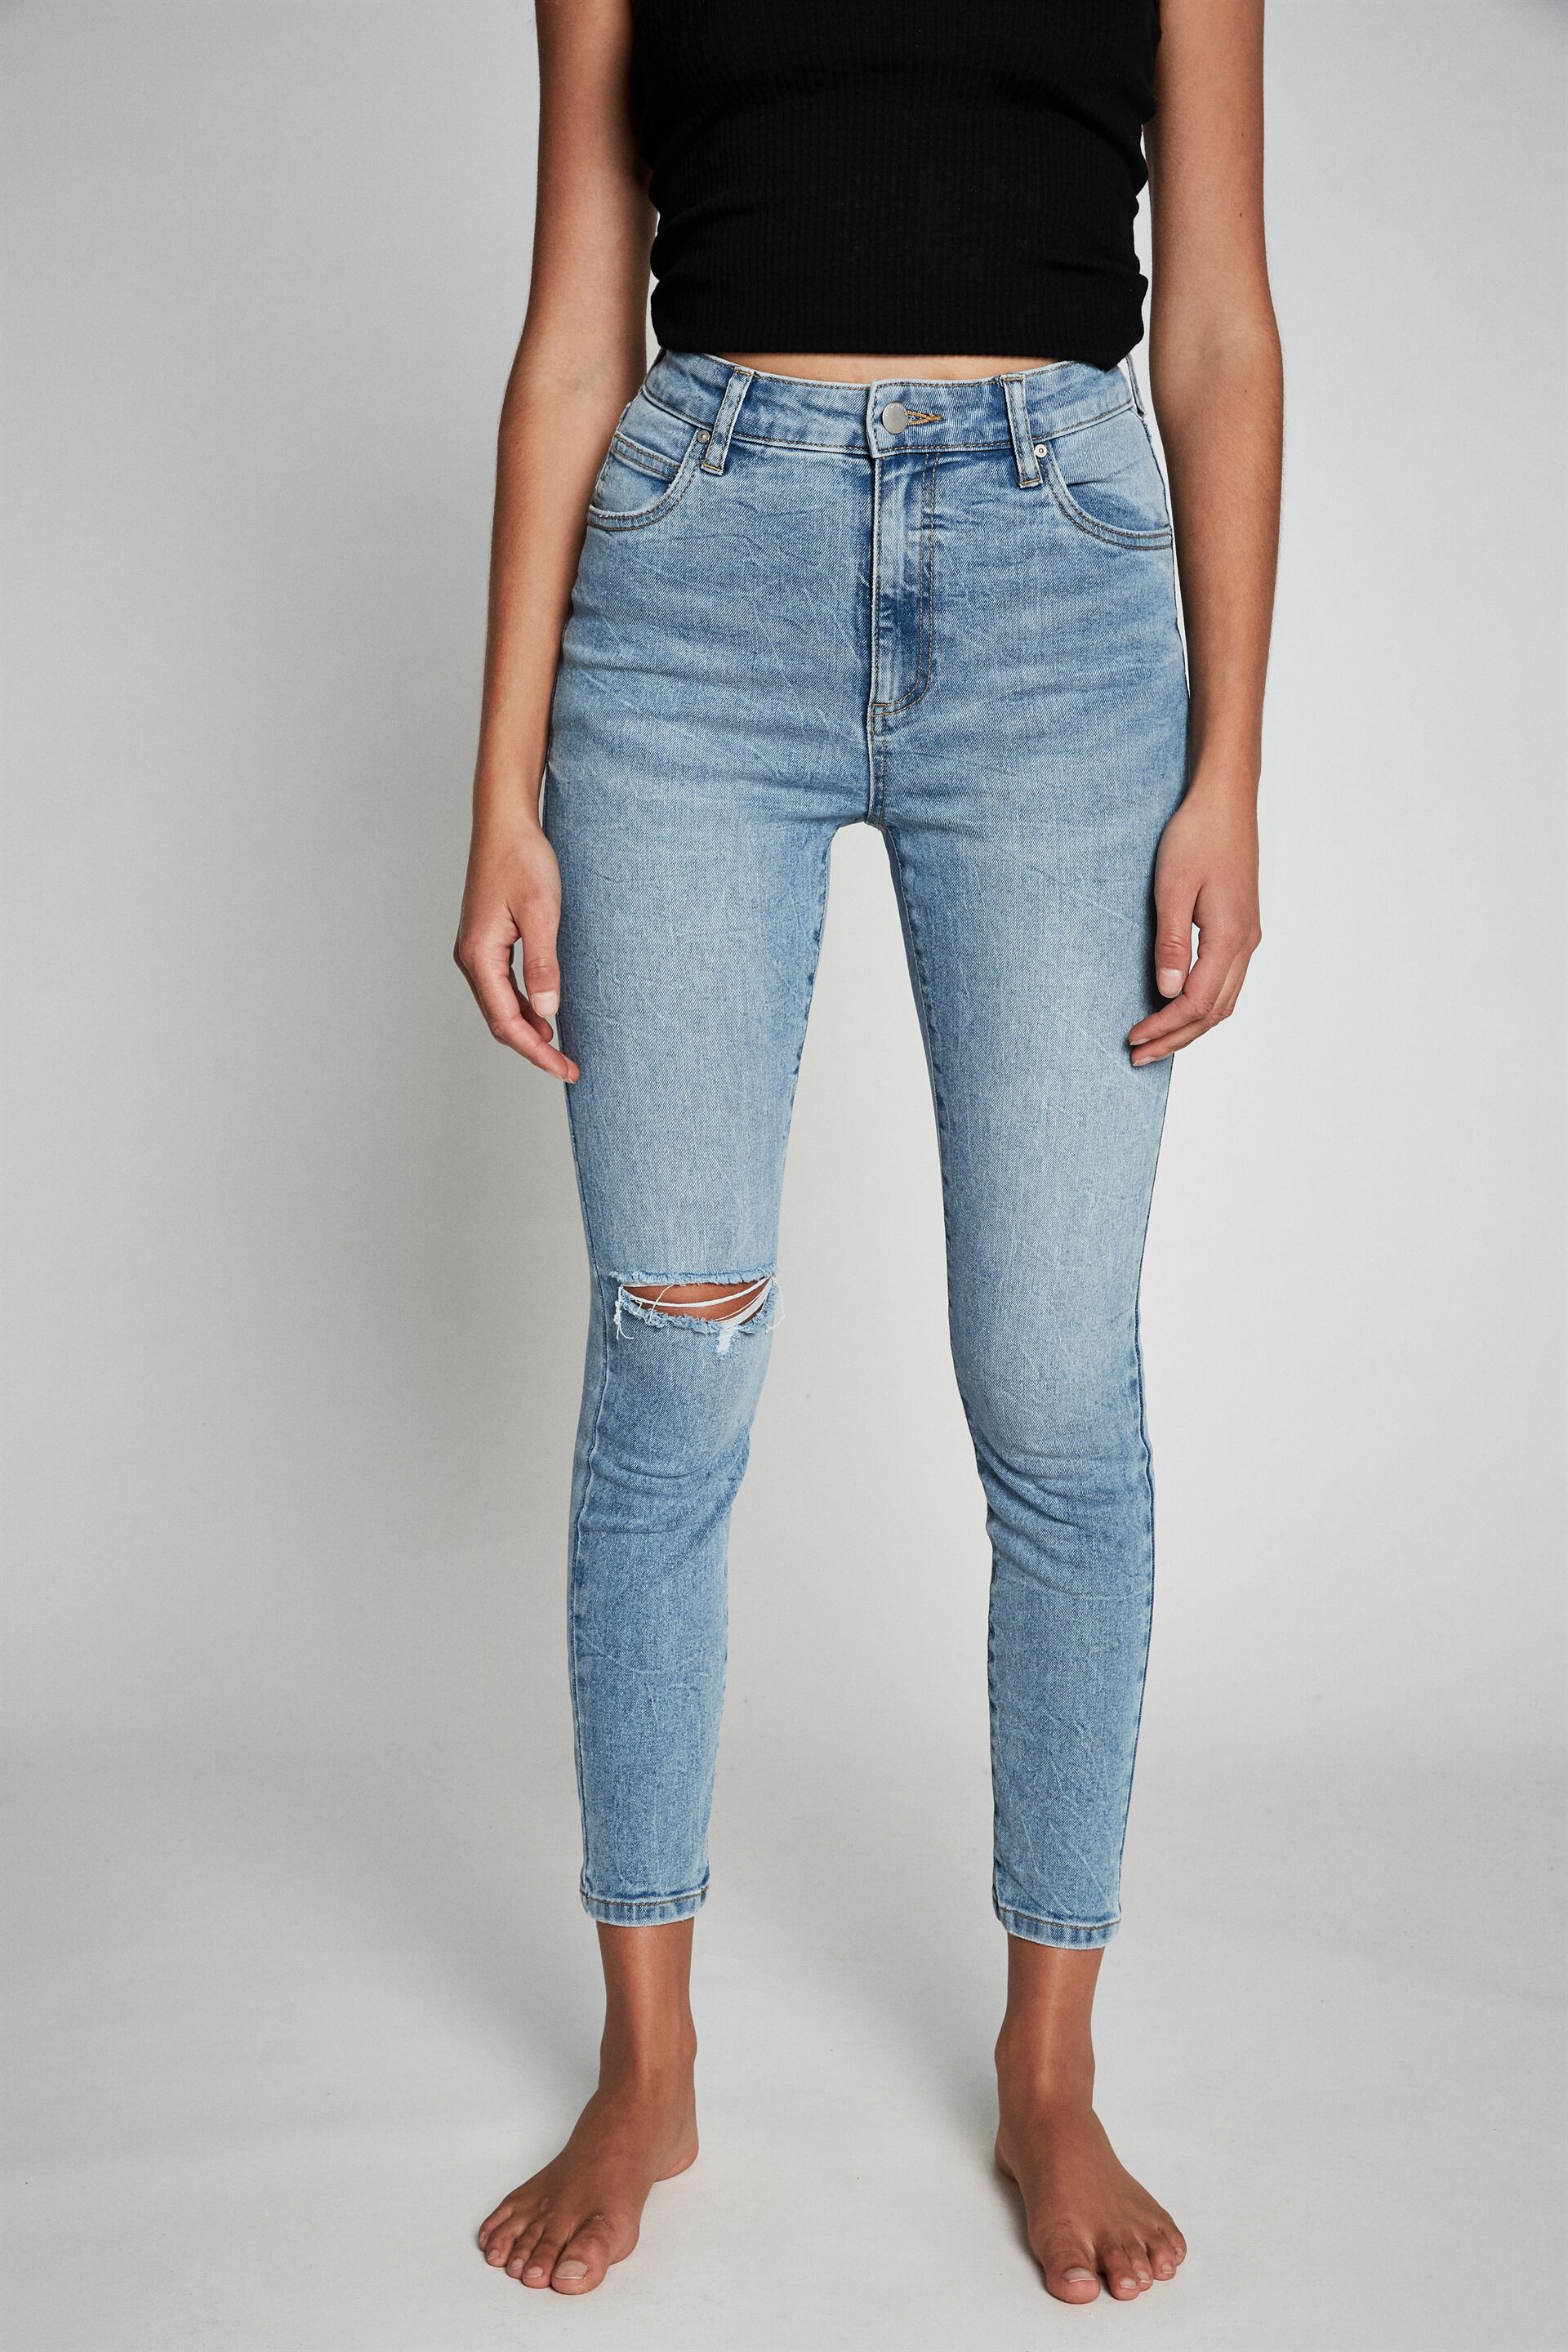 cotton on high skinny jeans